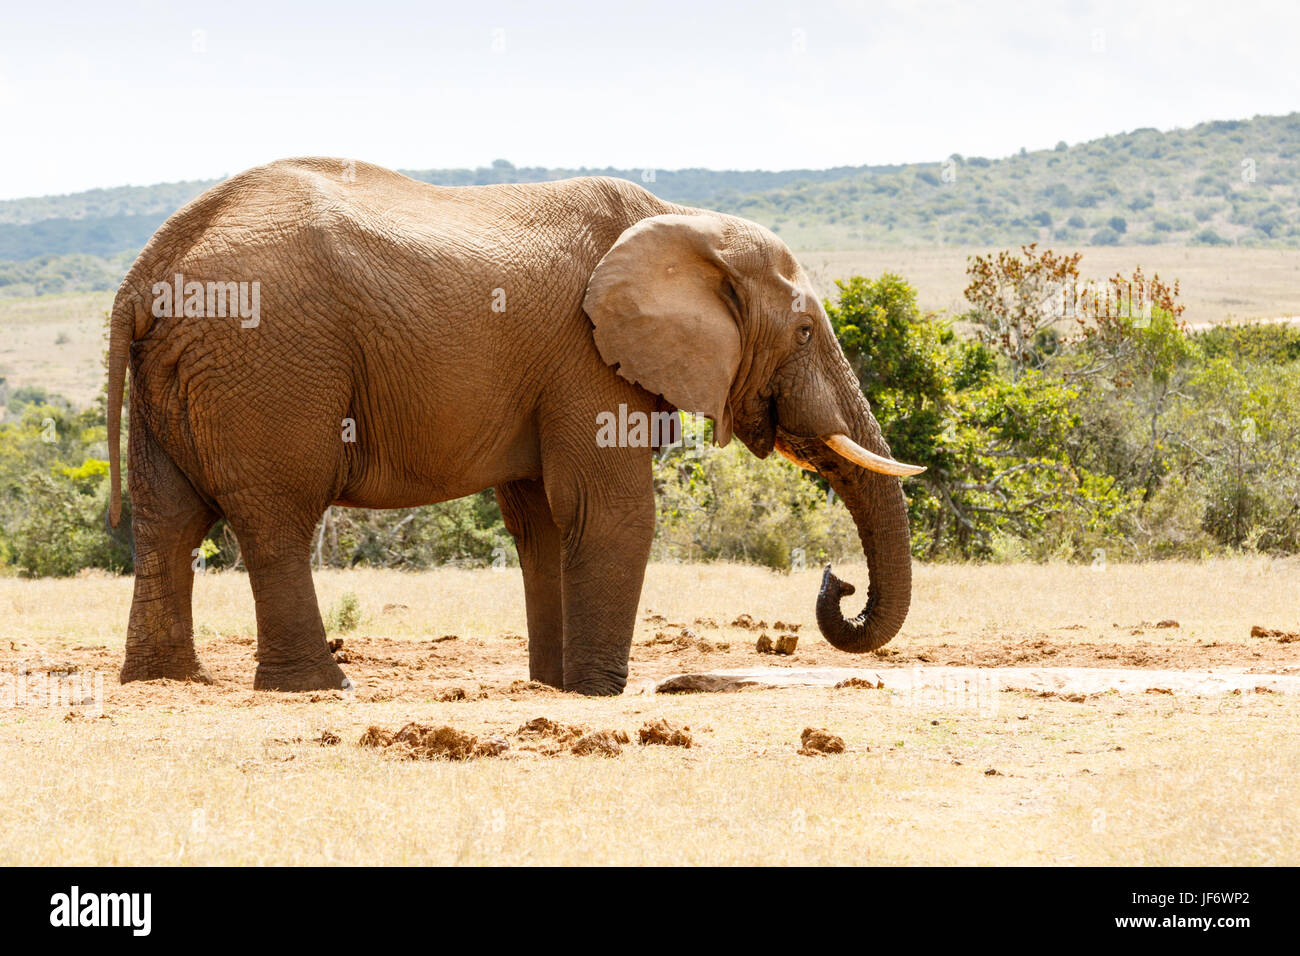 African Bush Elephant Drinking some Water Stock Photo